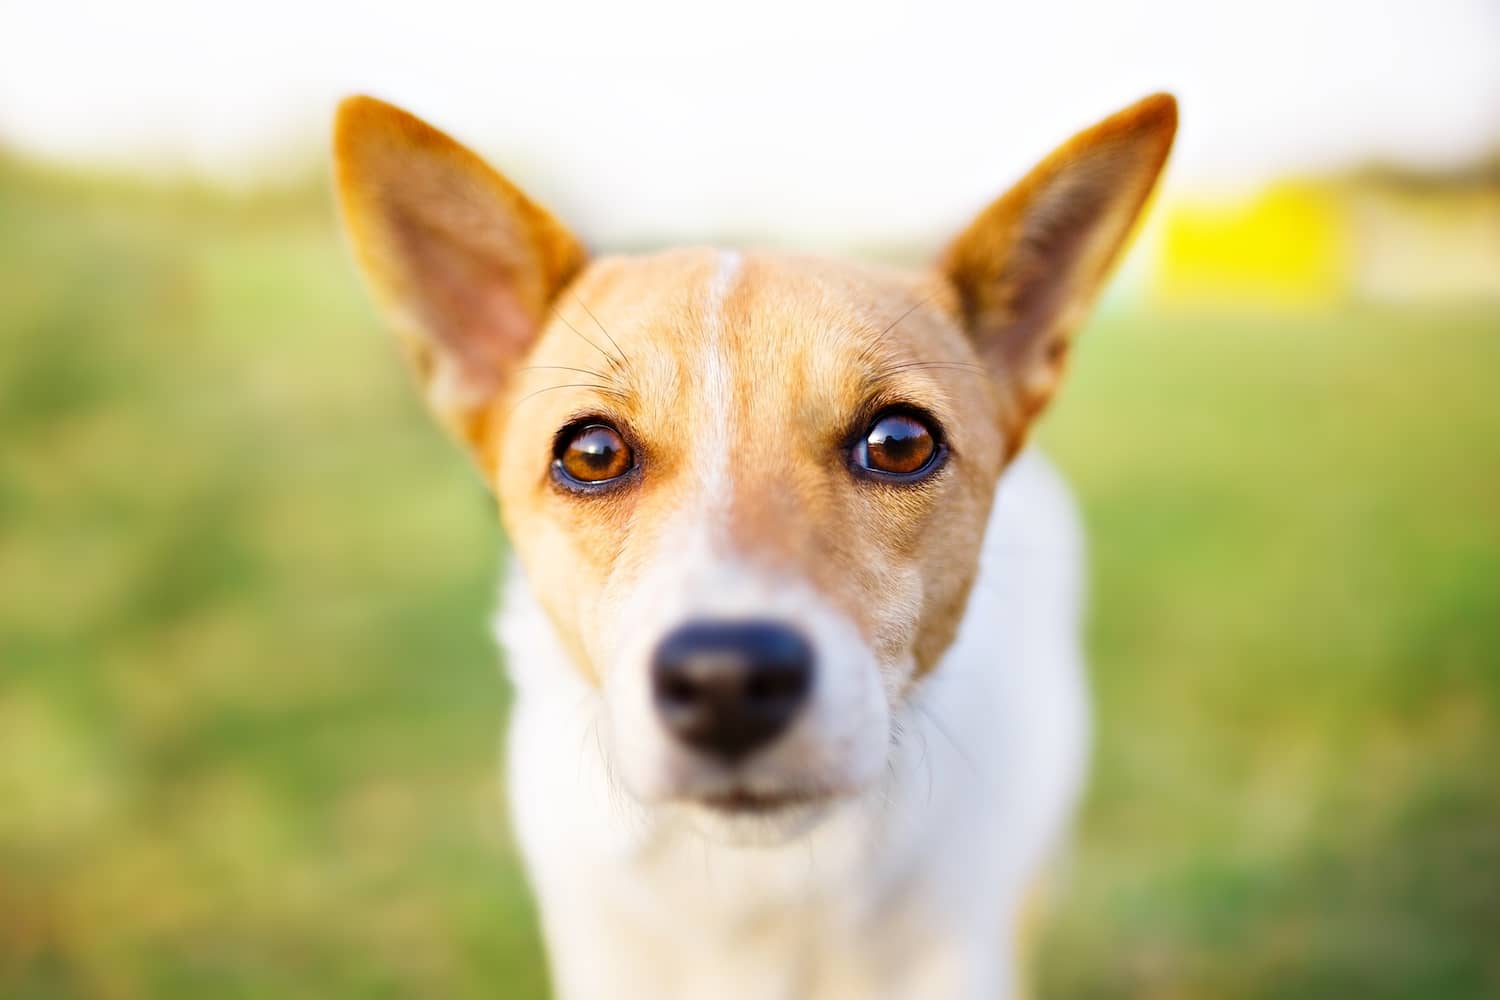 What Causes A Dog’s Eye To Bulge